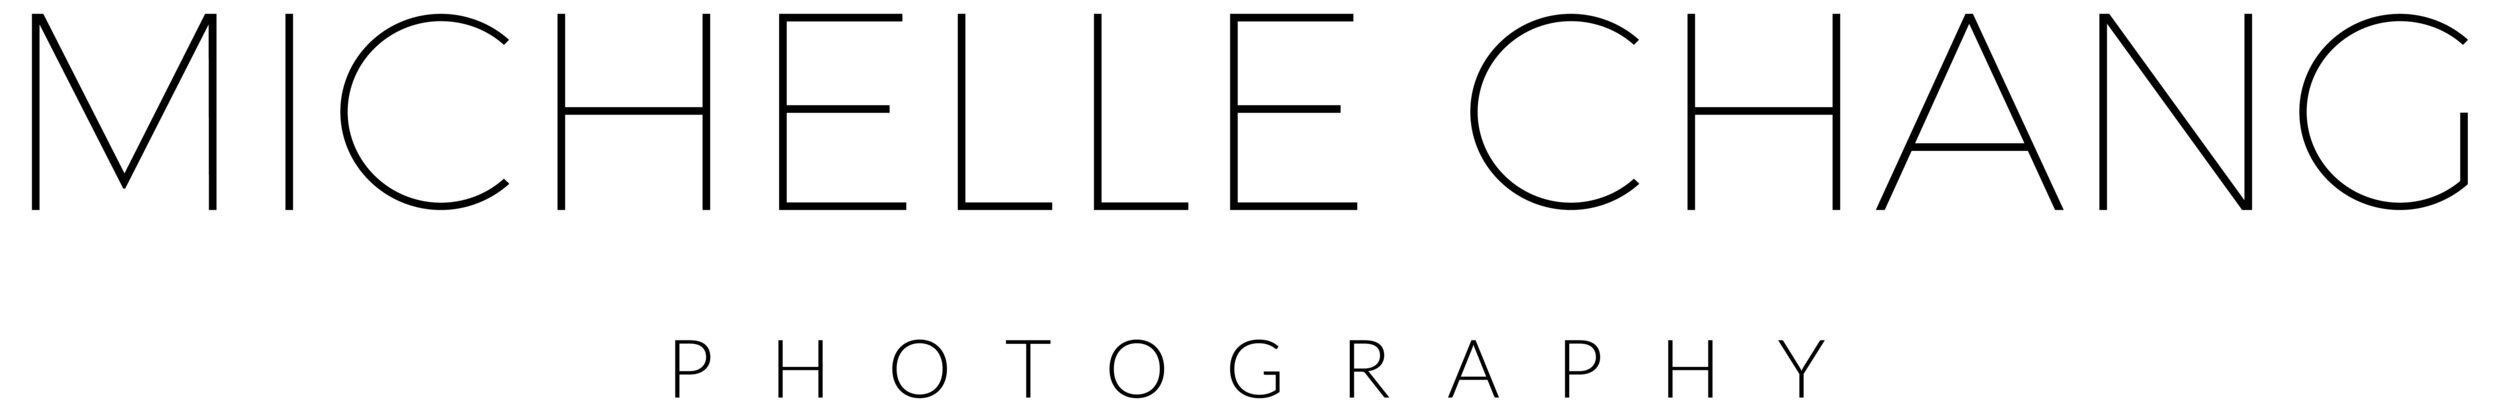 MICHELLE CHANG PHOTOGRAPHY | Wedding Photography | Family Photography | Lifestyle Photography | Fashion Photography